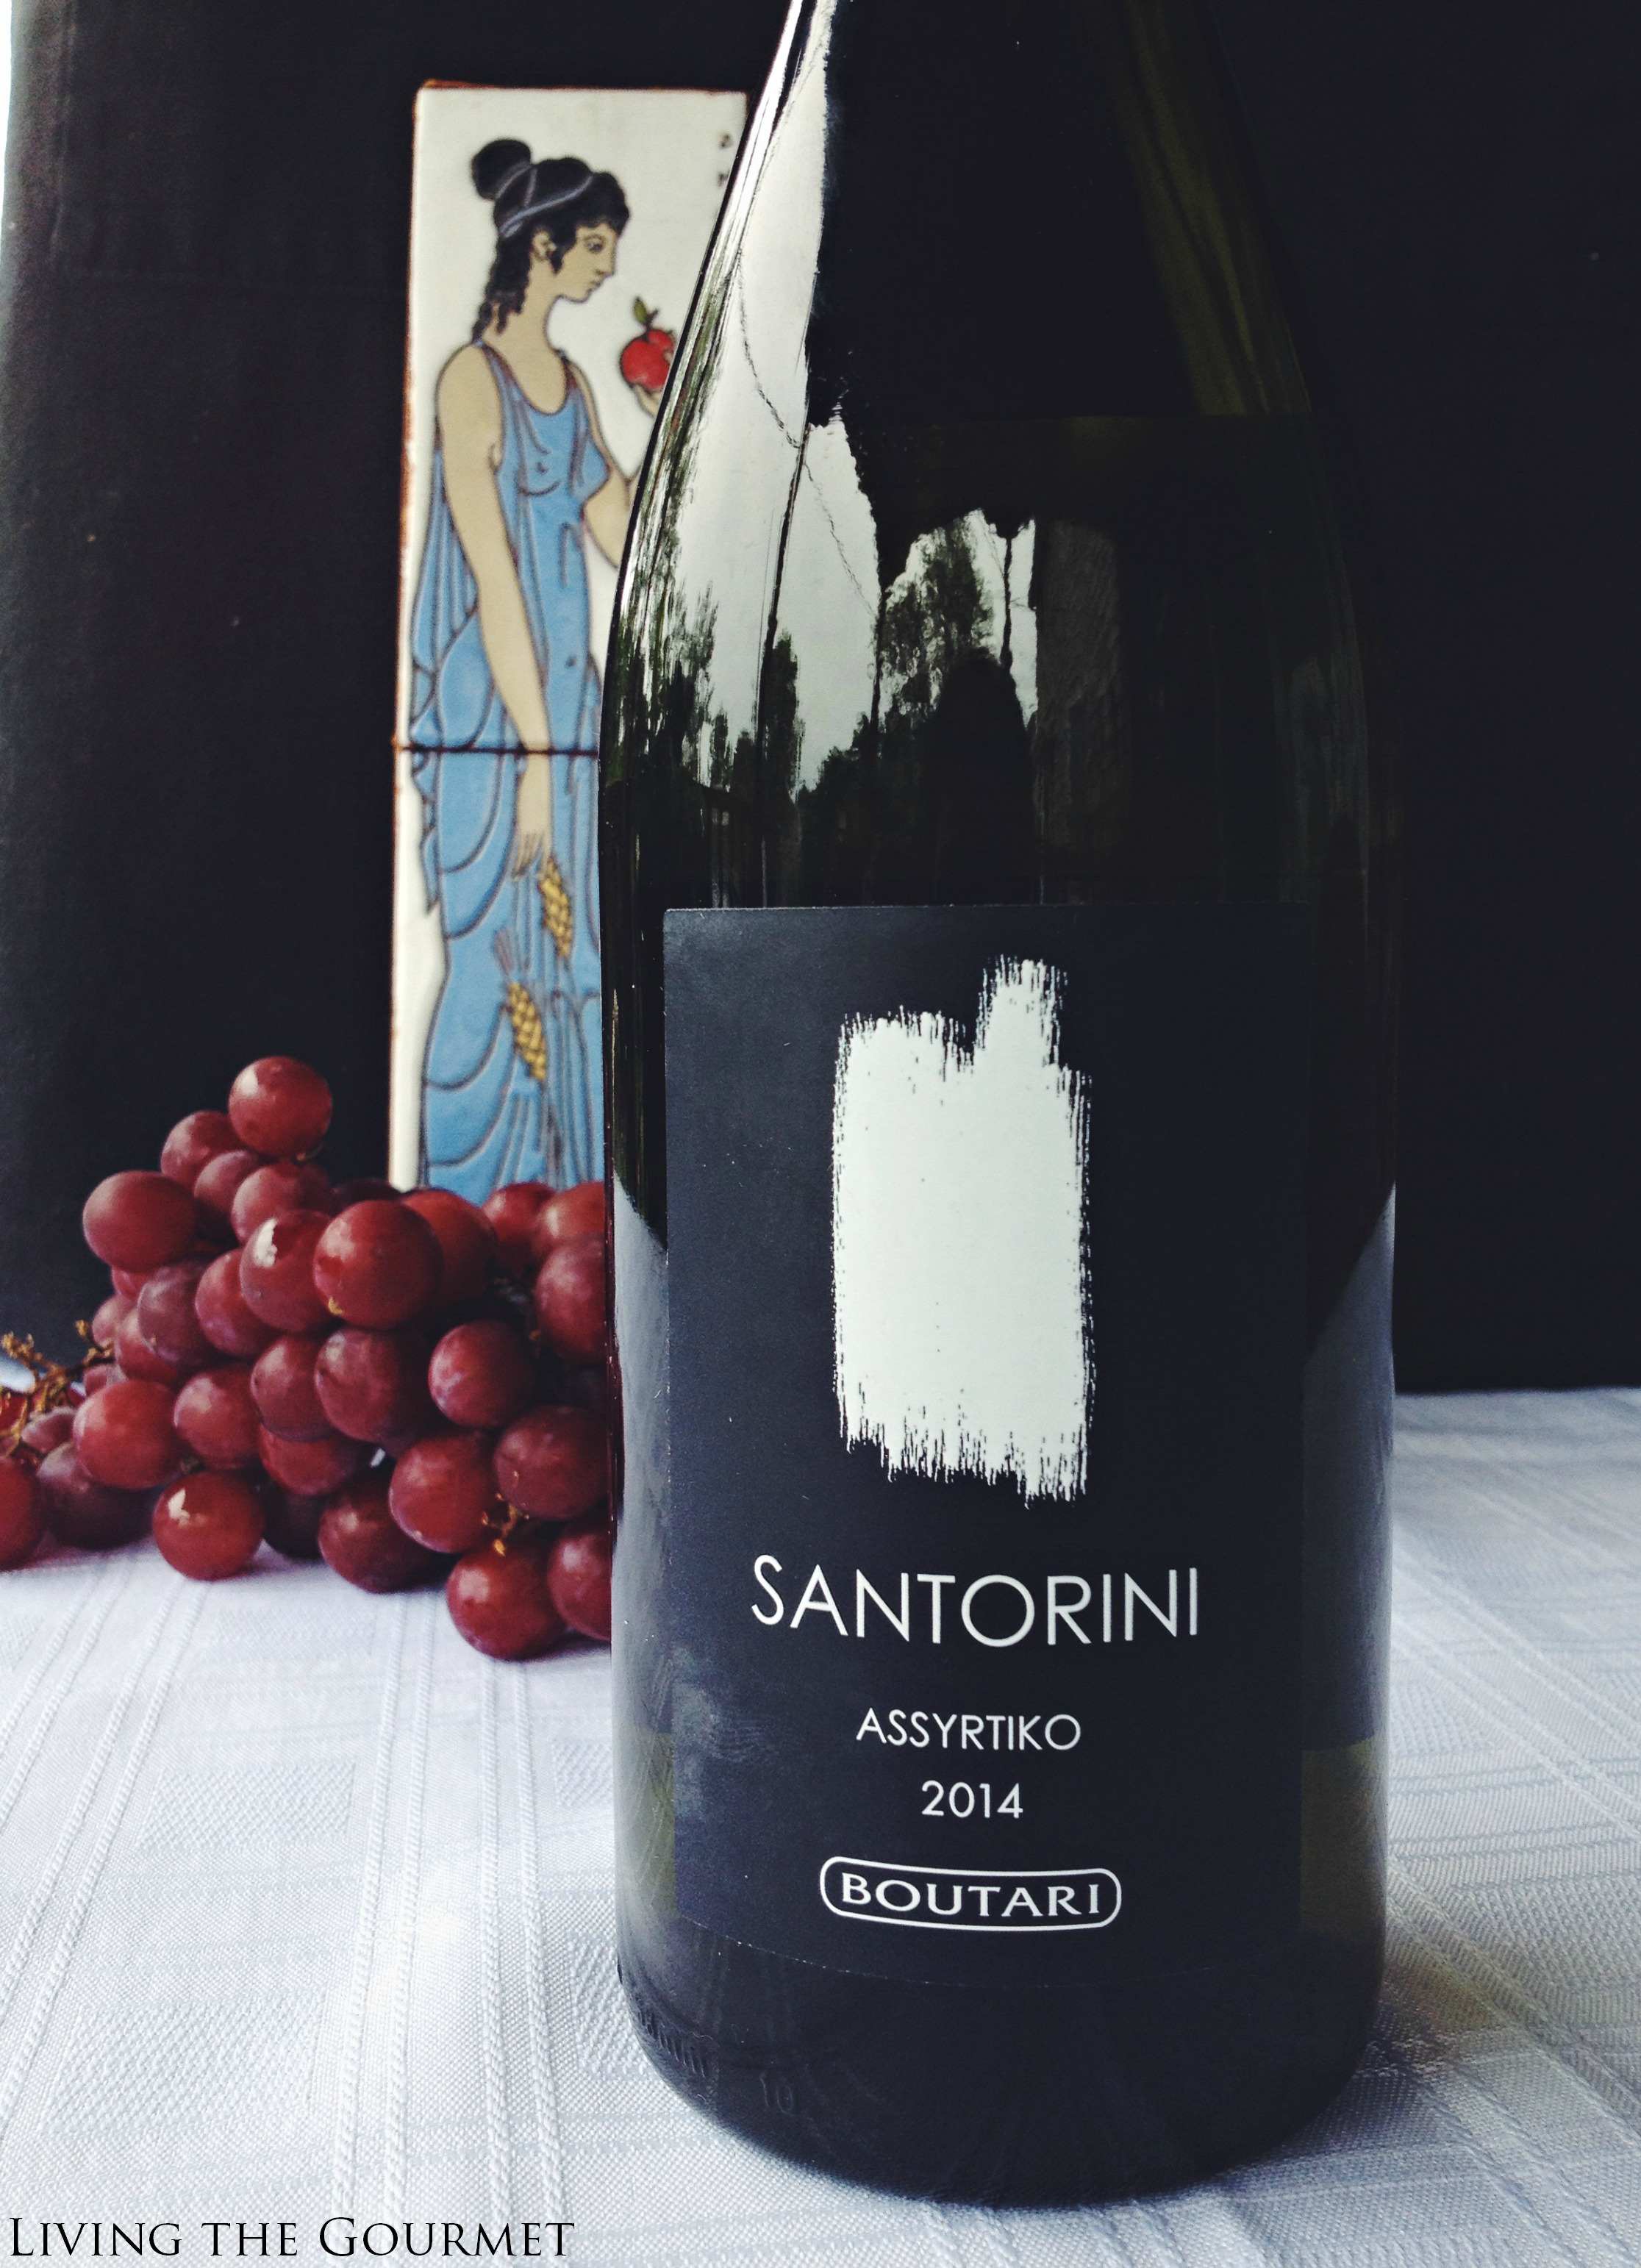 Living the Gourmet: The Wines of Santorini